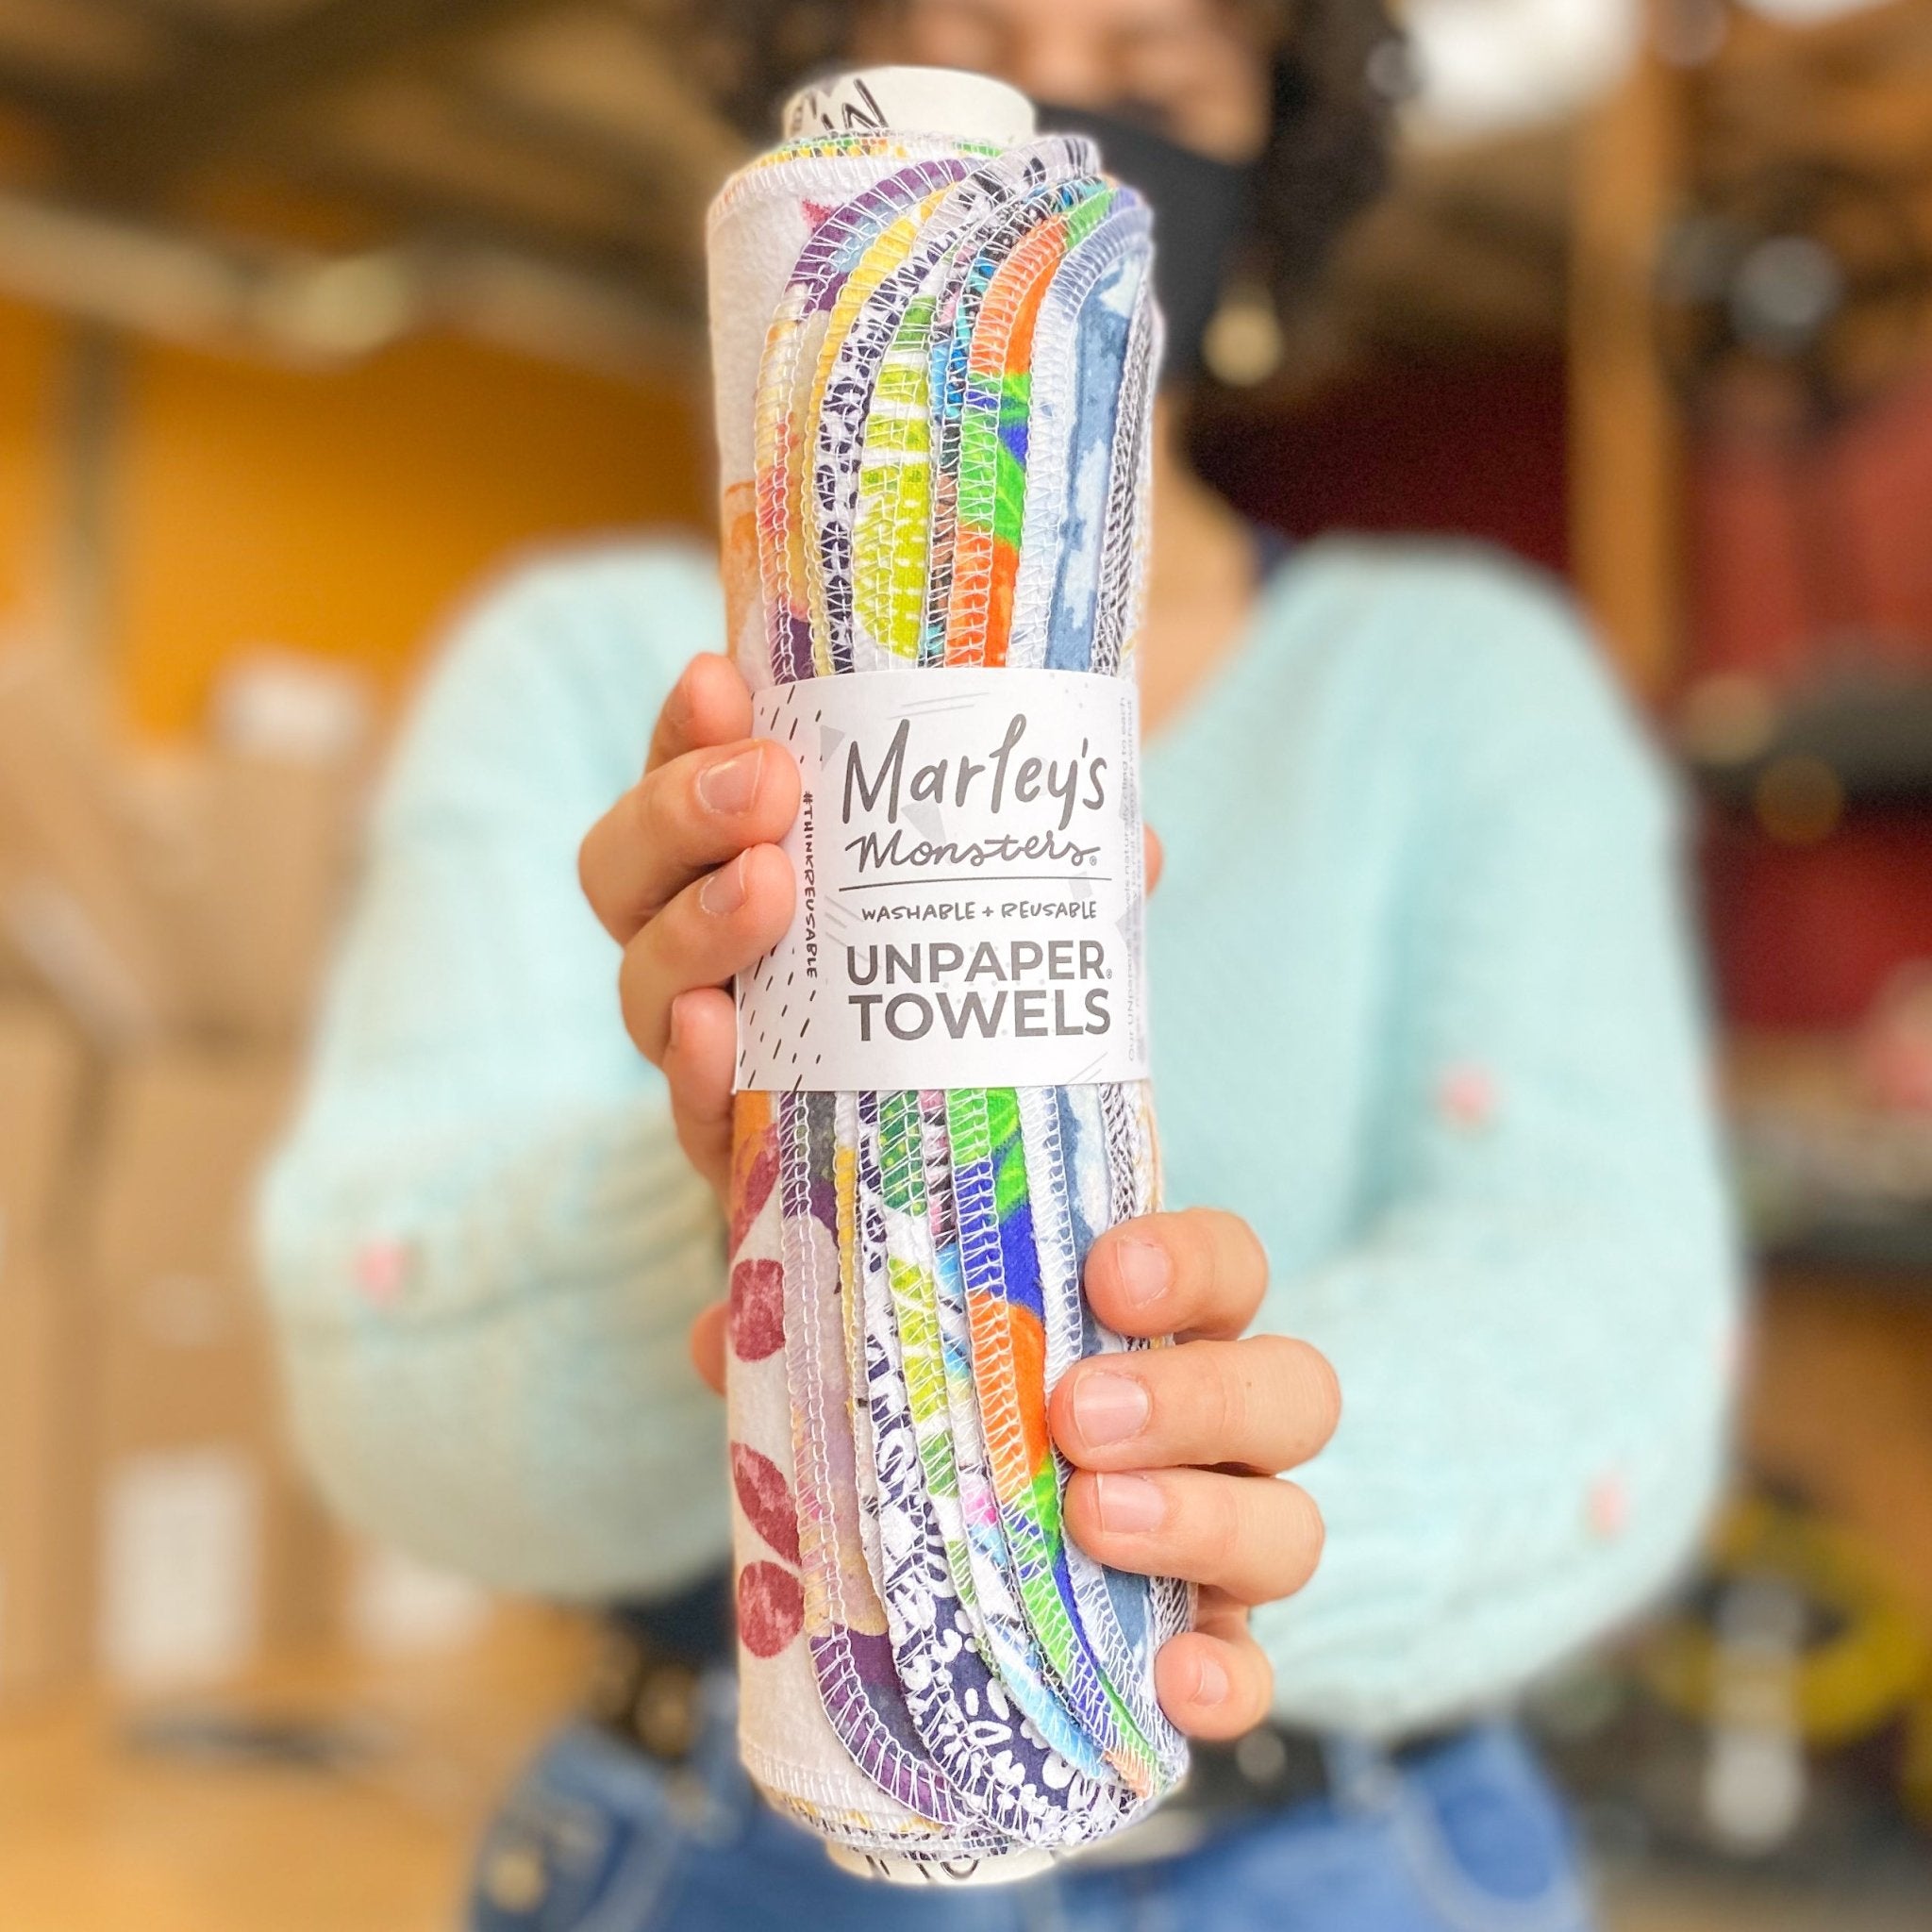 UNpaper® Towels: Marley's Favorites! - Marley's Monsters shows a human blurred in the background holding the roll of towels